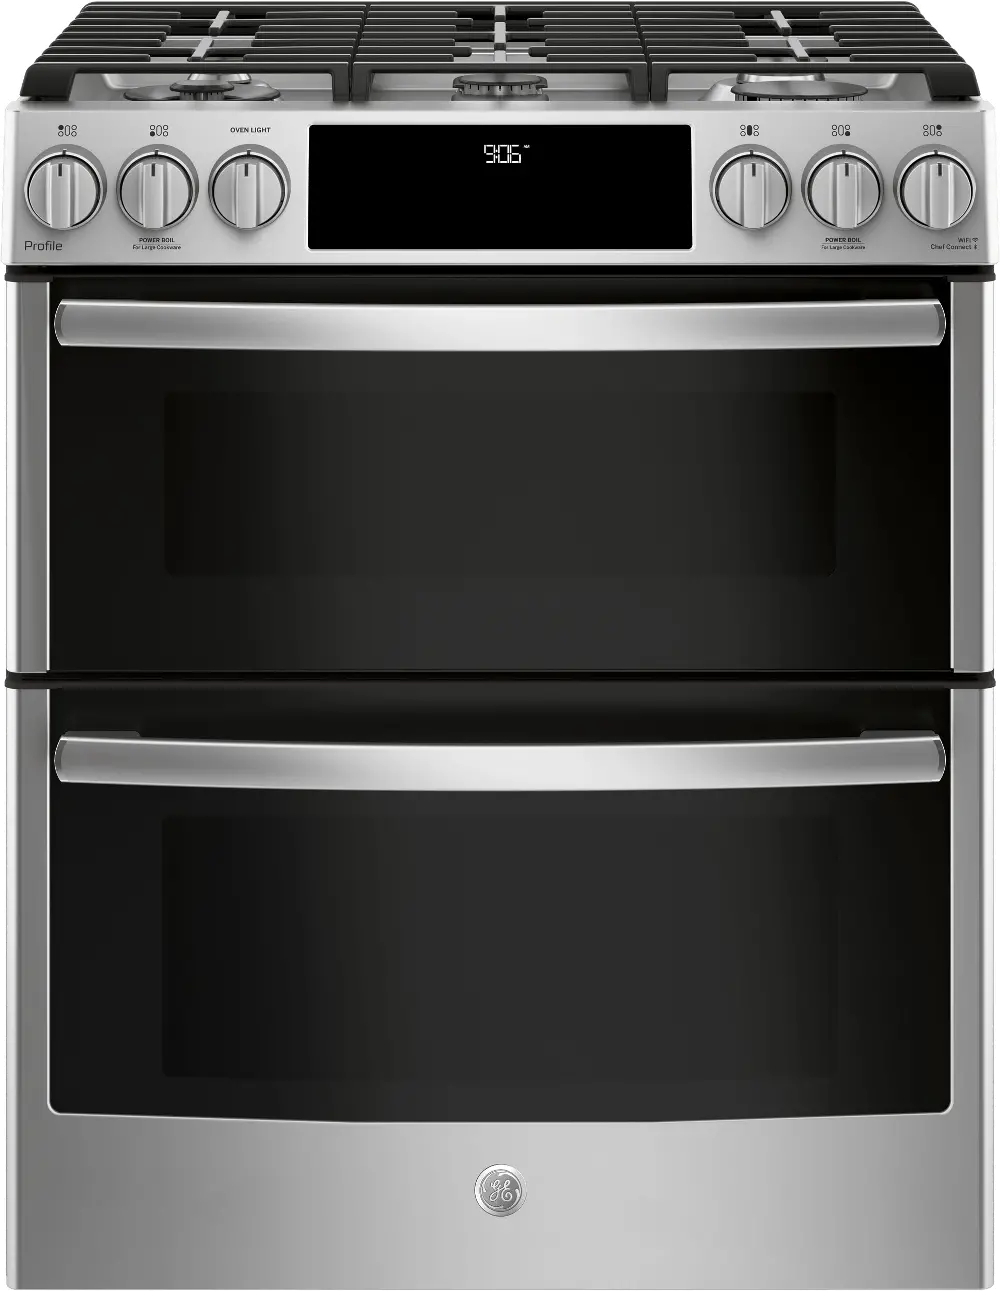 PGS960SELSS GE Profile Double Oven Gas Range - 6.7 cu. ft. Stainless Steel-1